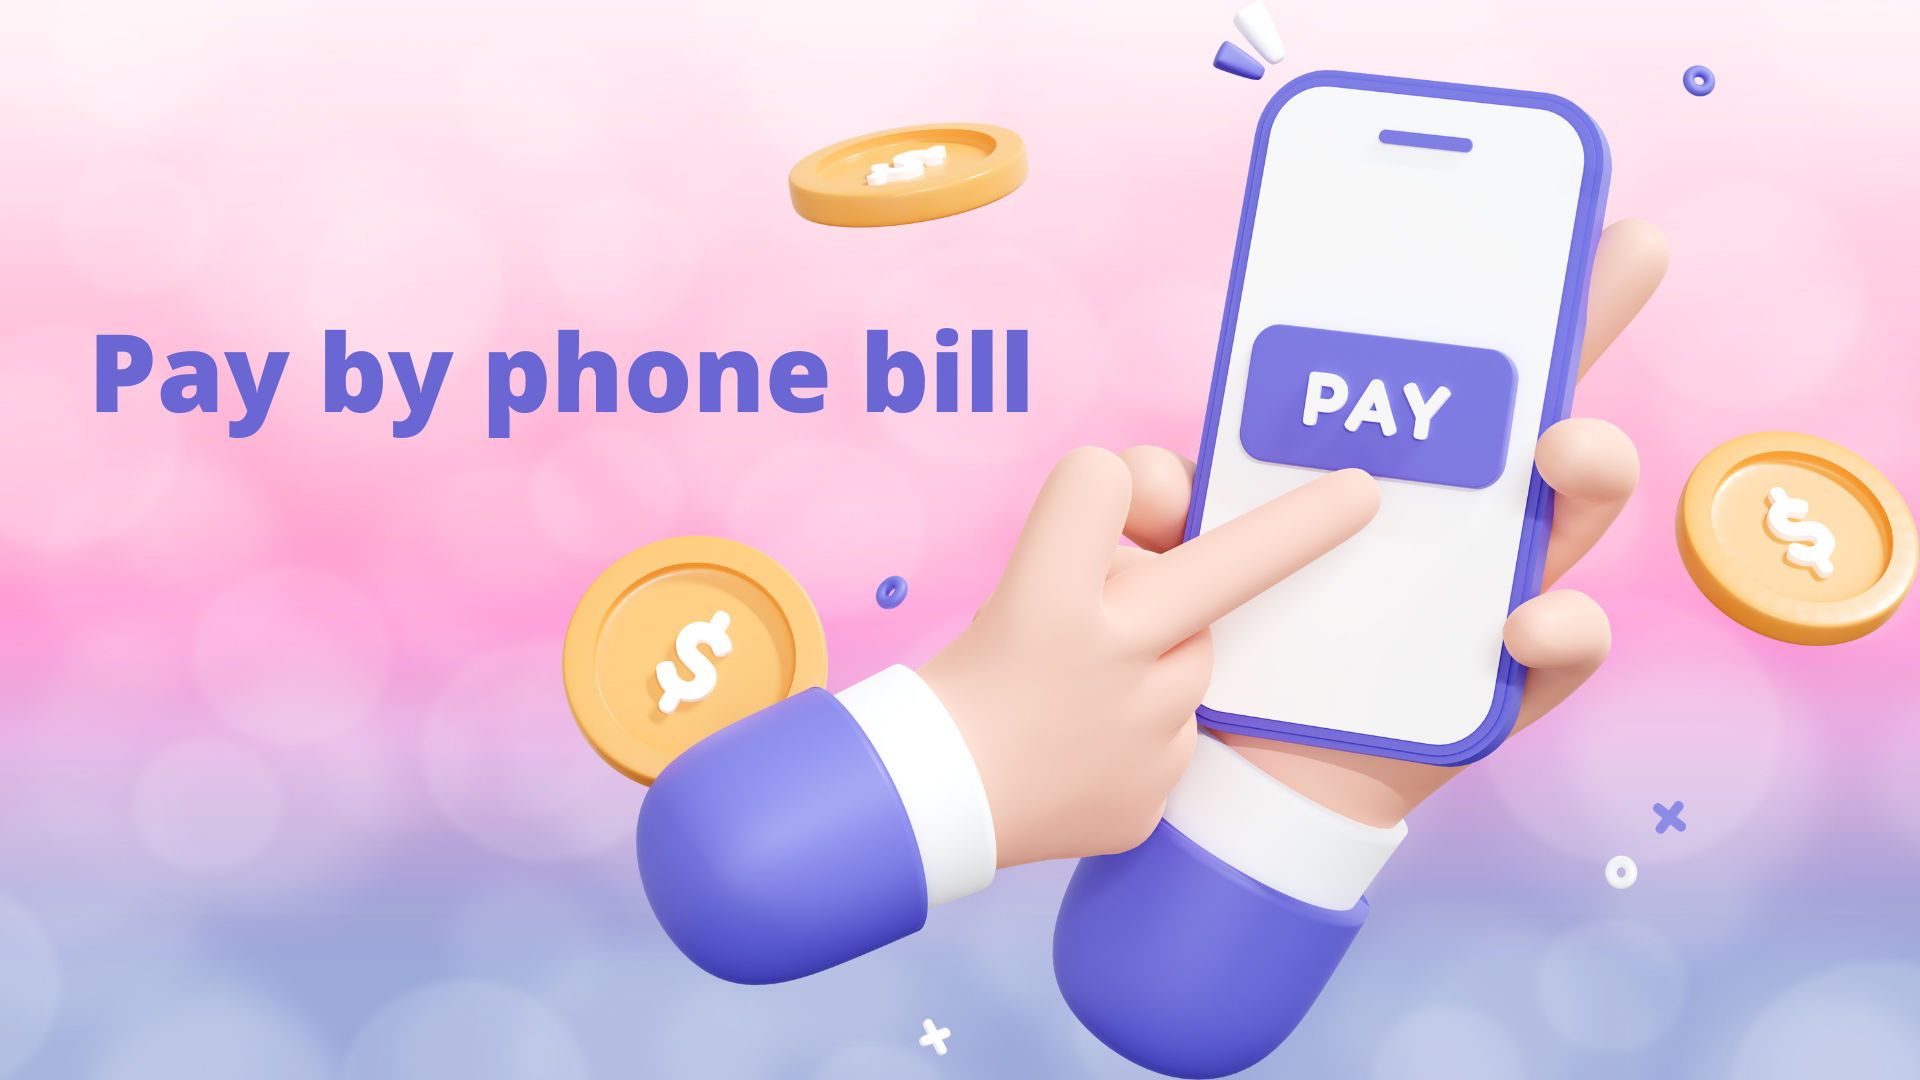 pay by mobile phone bill bingo and slots money dollars